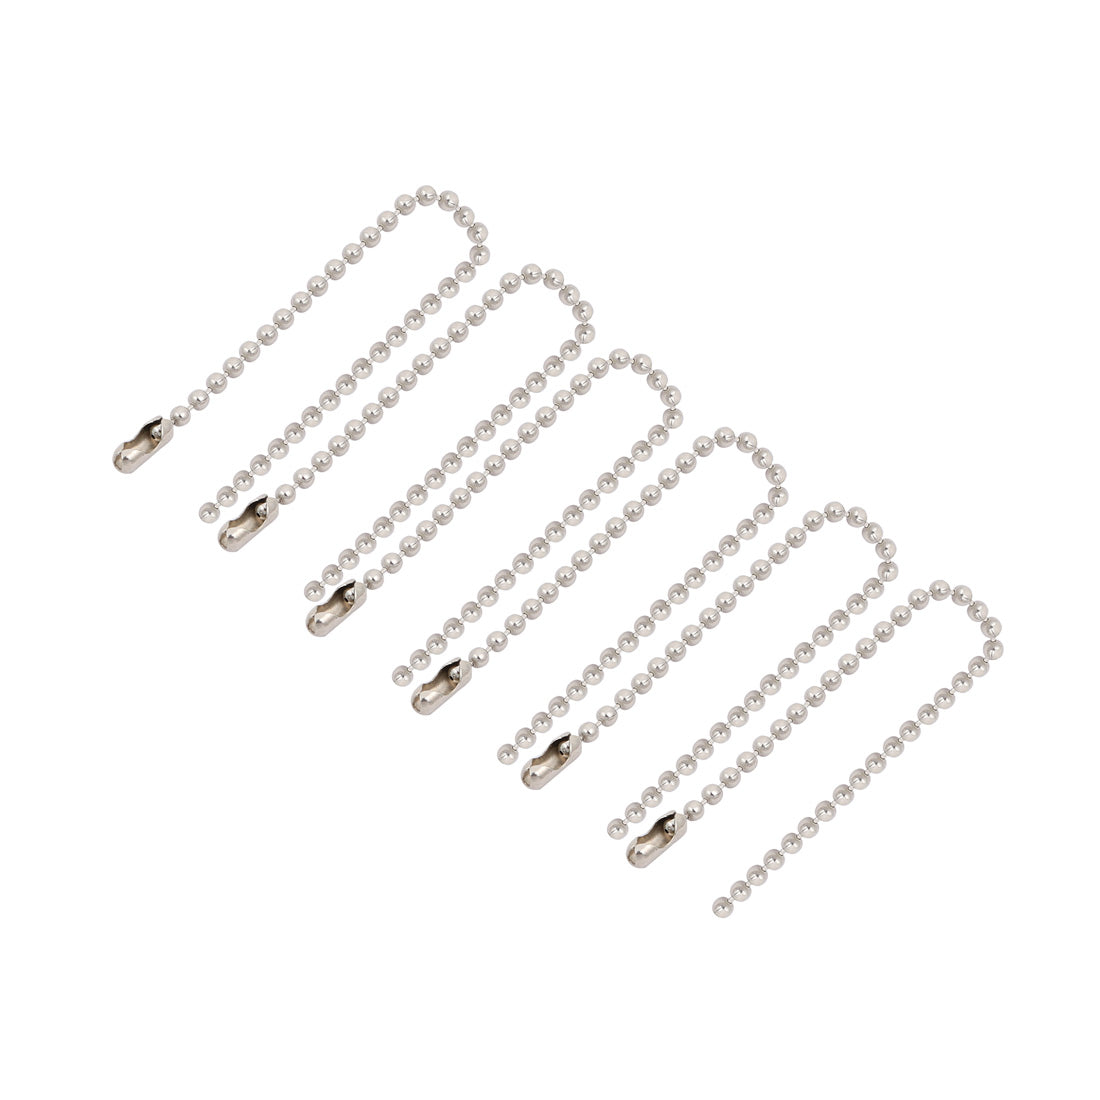 uxcell Uxcell 6pcs Stainless Steel Clasp Ball Chain Keychain Silver Tone 2mm Dia 8cm Length